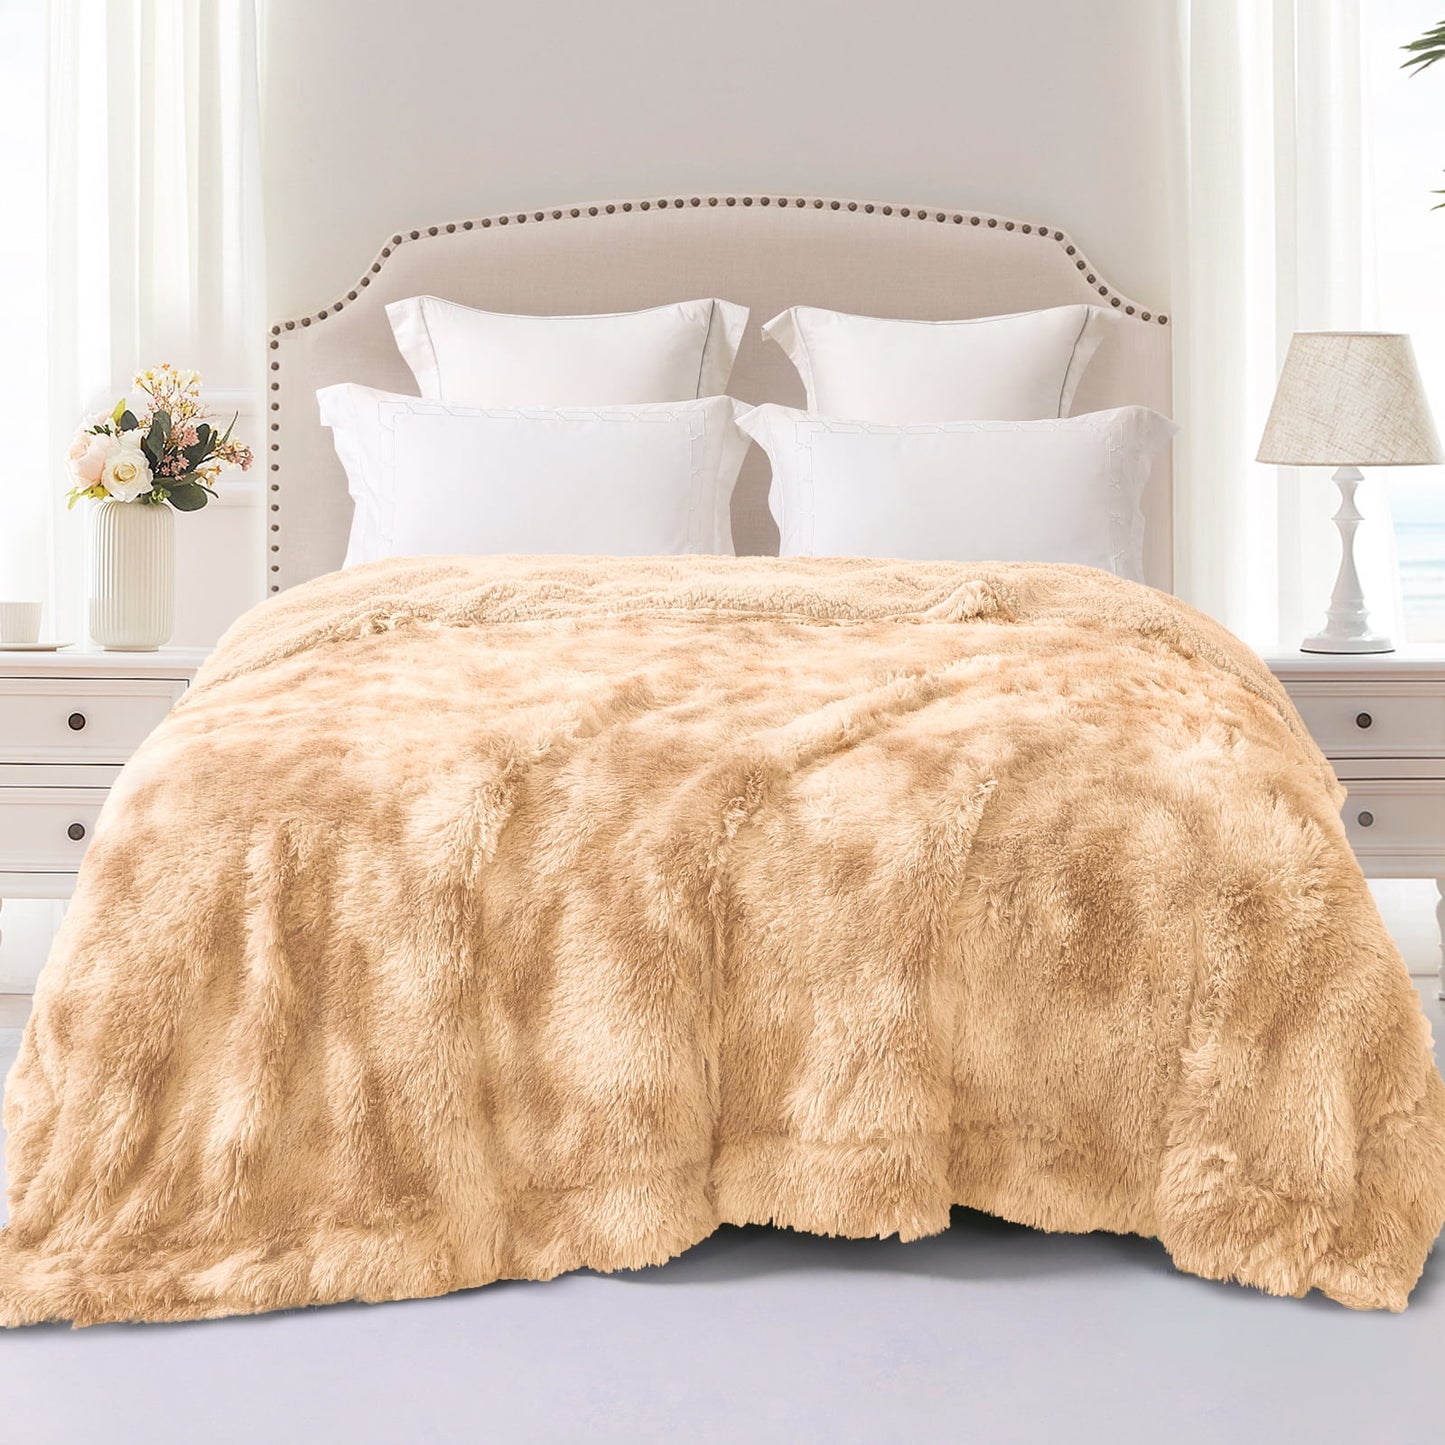 Exclusivo Mezcla Twin Size Faux Fur Bed Blanket, Super Soft Fuzzy and Plush Reversible Sherpa Fleece Blanket and Warm Blankets for Bed, Sofa, Travel, 60X80 inches, Camel